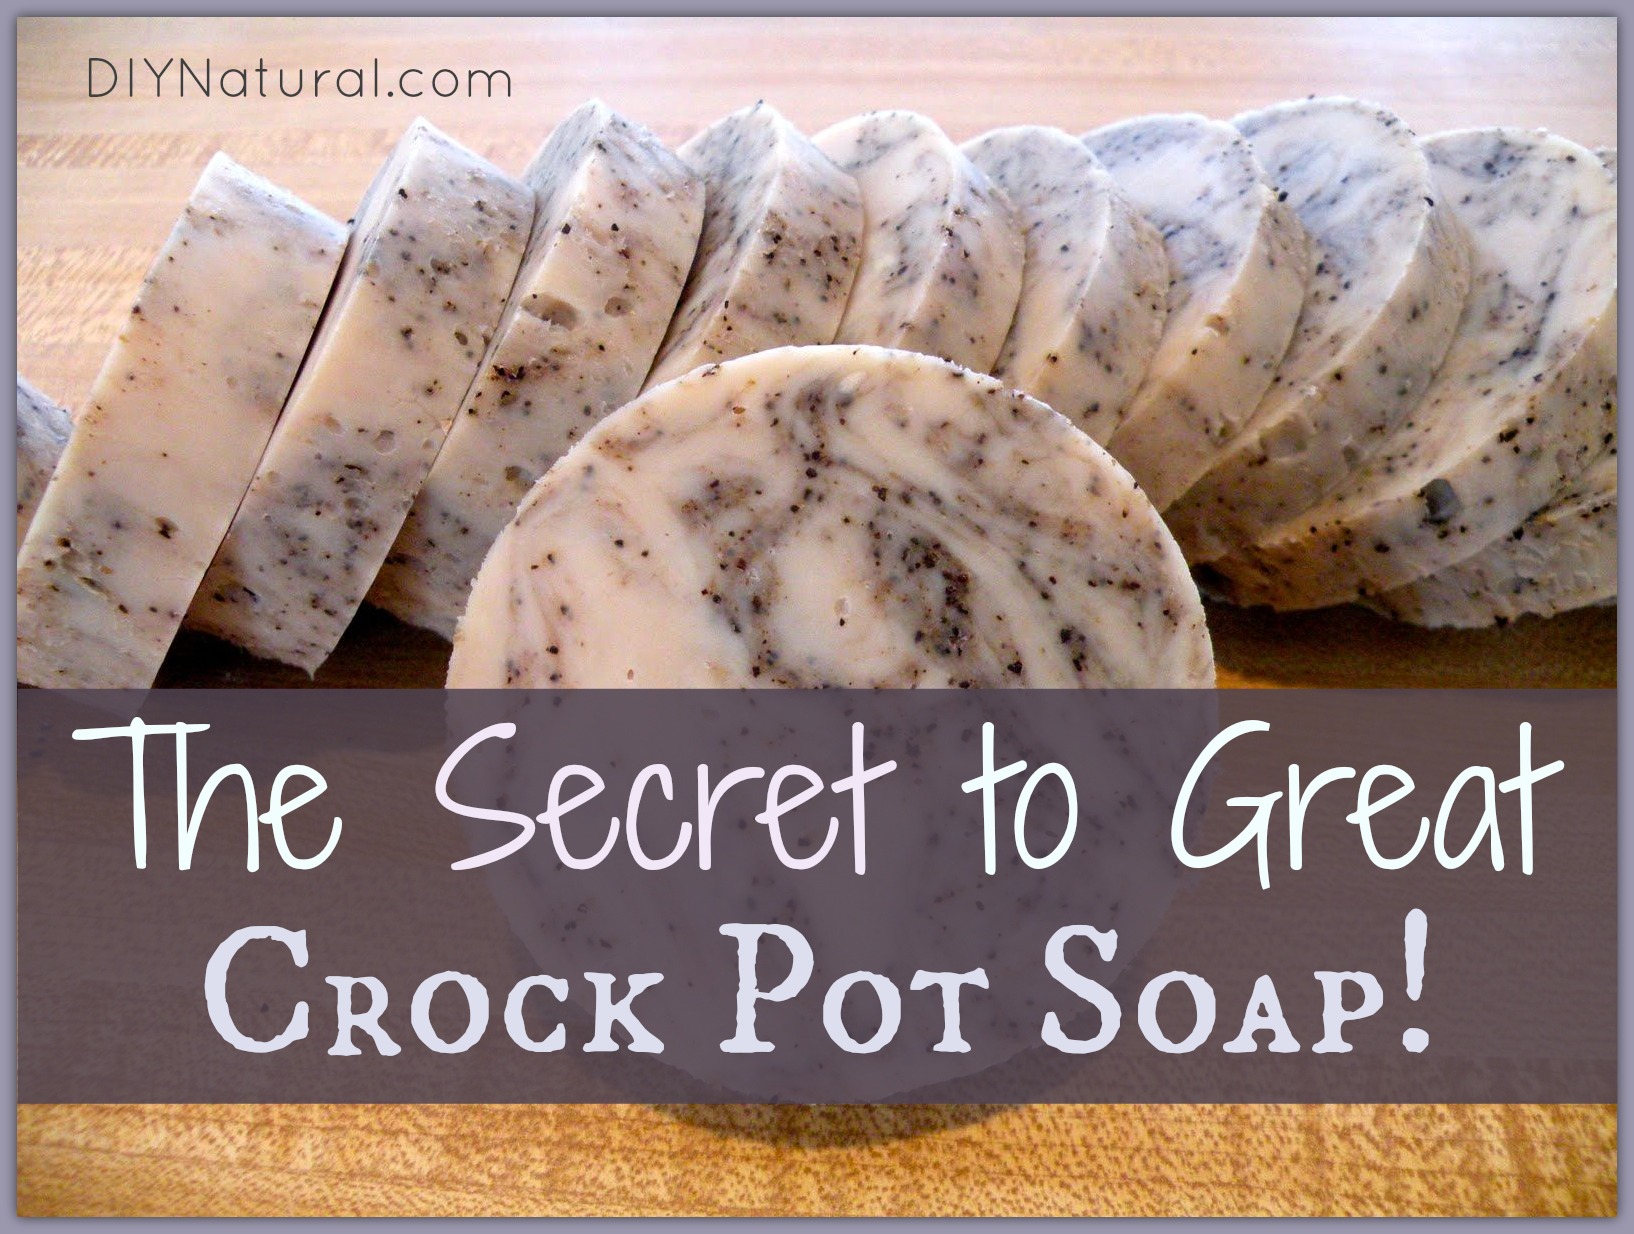 Crock Pot Soap: A Simple Recipe for How to Make Soap in A Slow Cooker